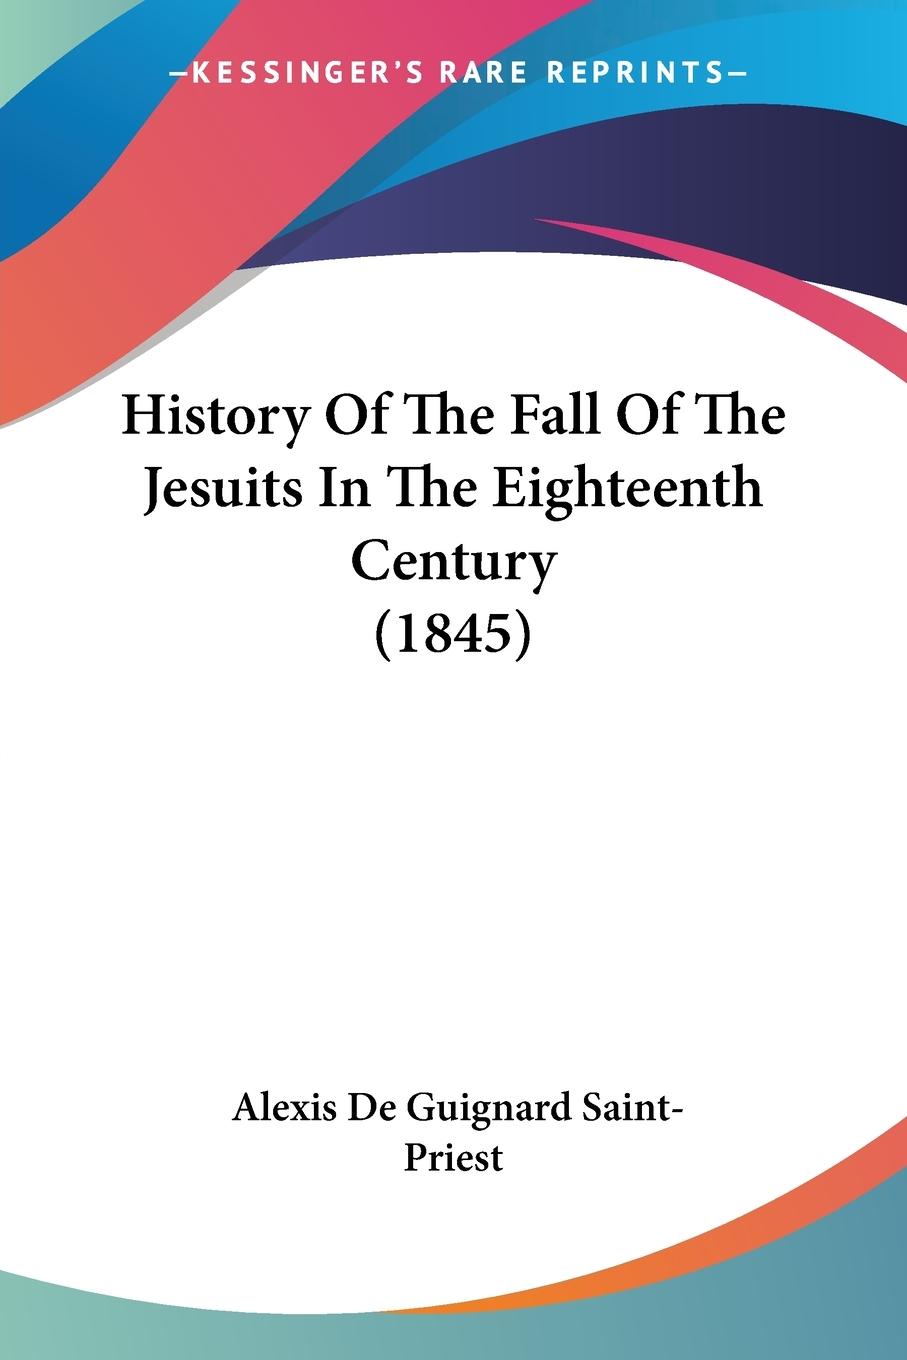 History Of The Fall Of The Jesuits In The Eighteenth Century (1845) - Saint-Priest, Alexis de Guignard